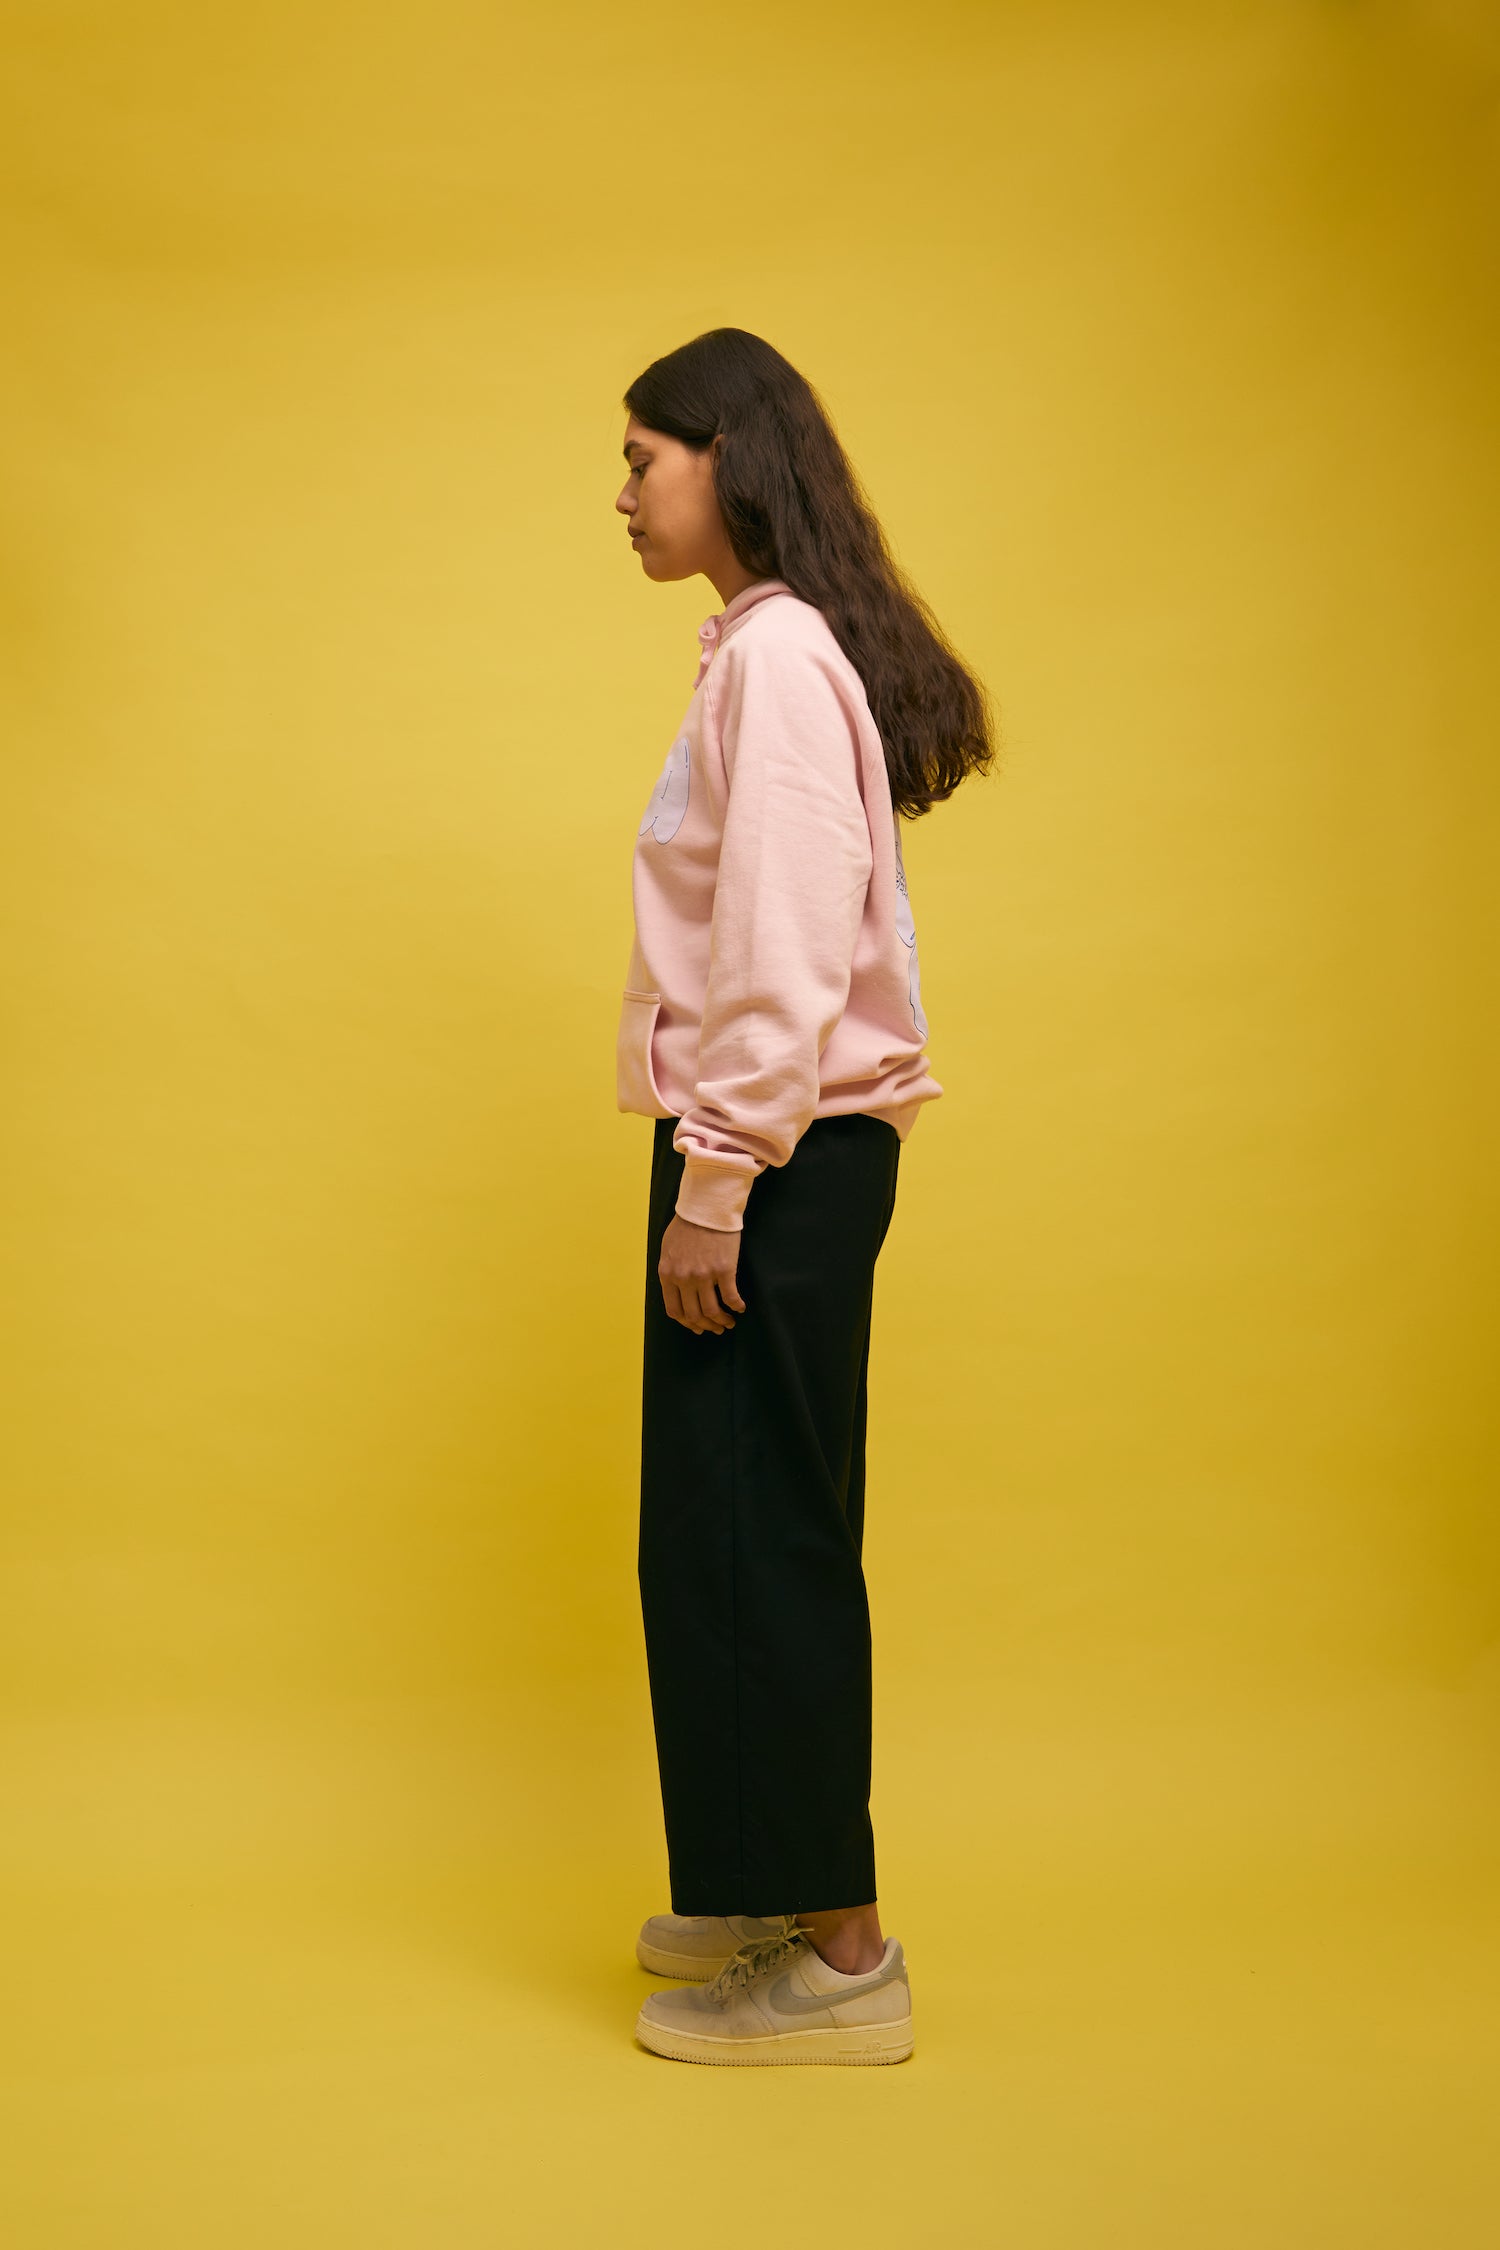 Karen Valerie standing in front of yellow wall wearing pink AS colour hoodie with Papa text on front and Hibiscus on the back